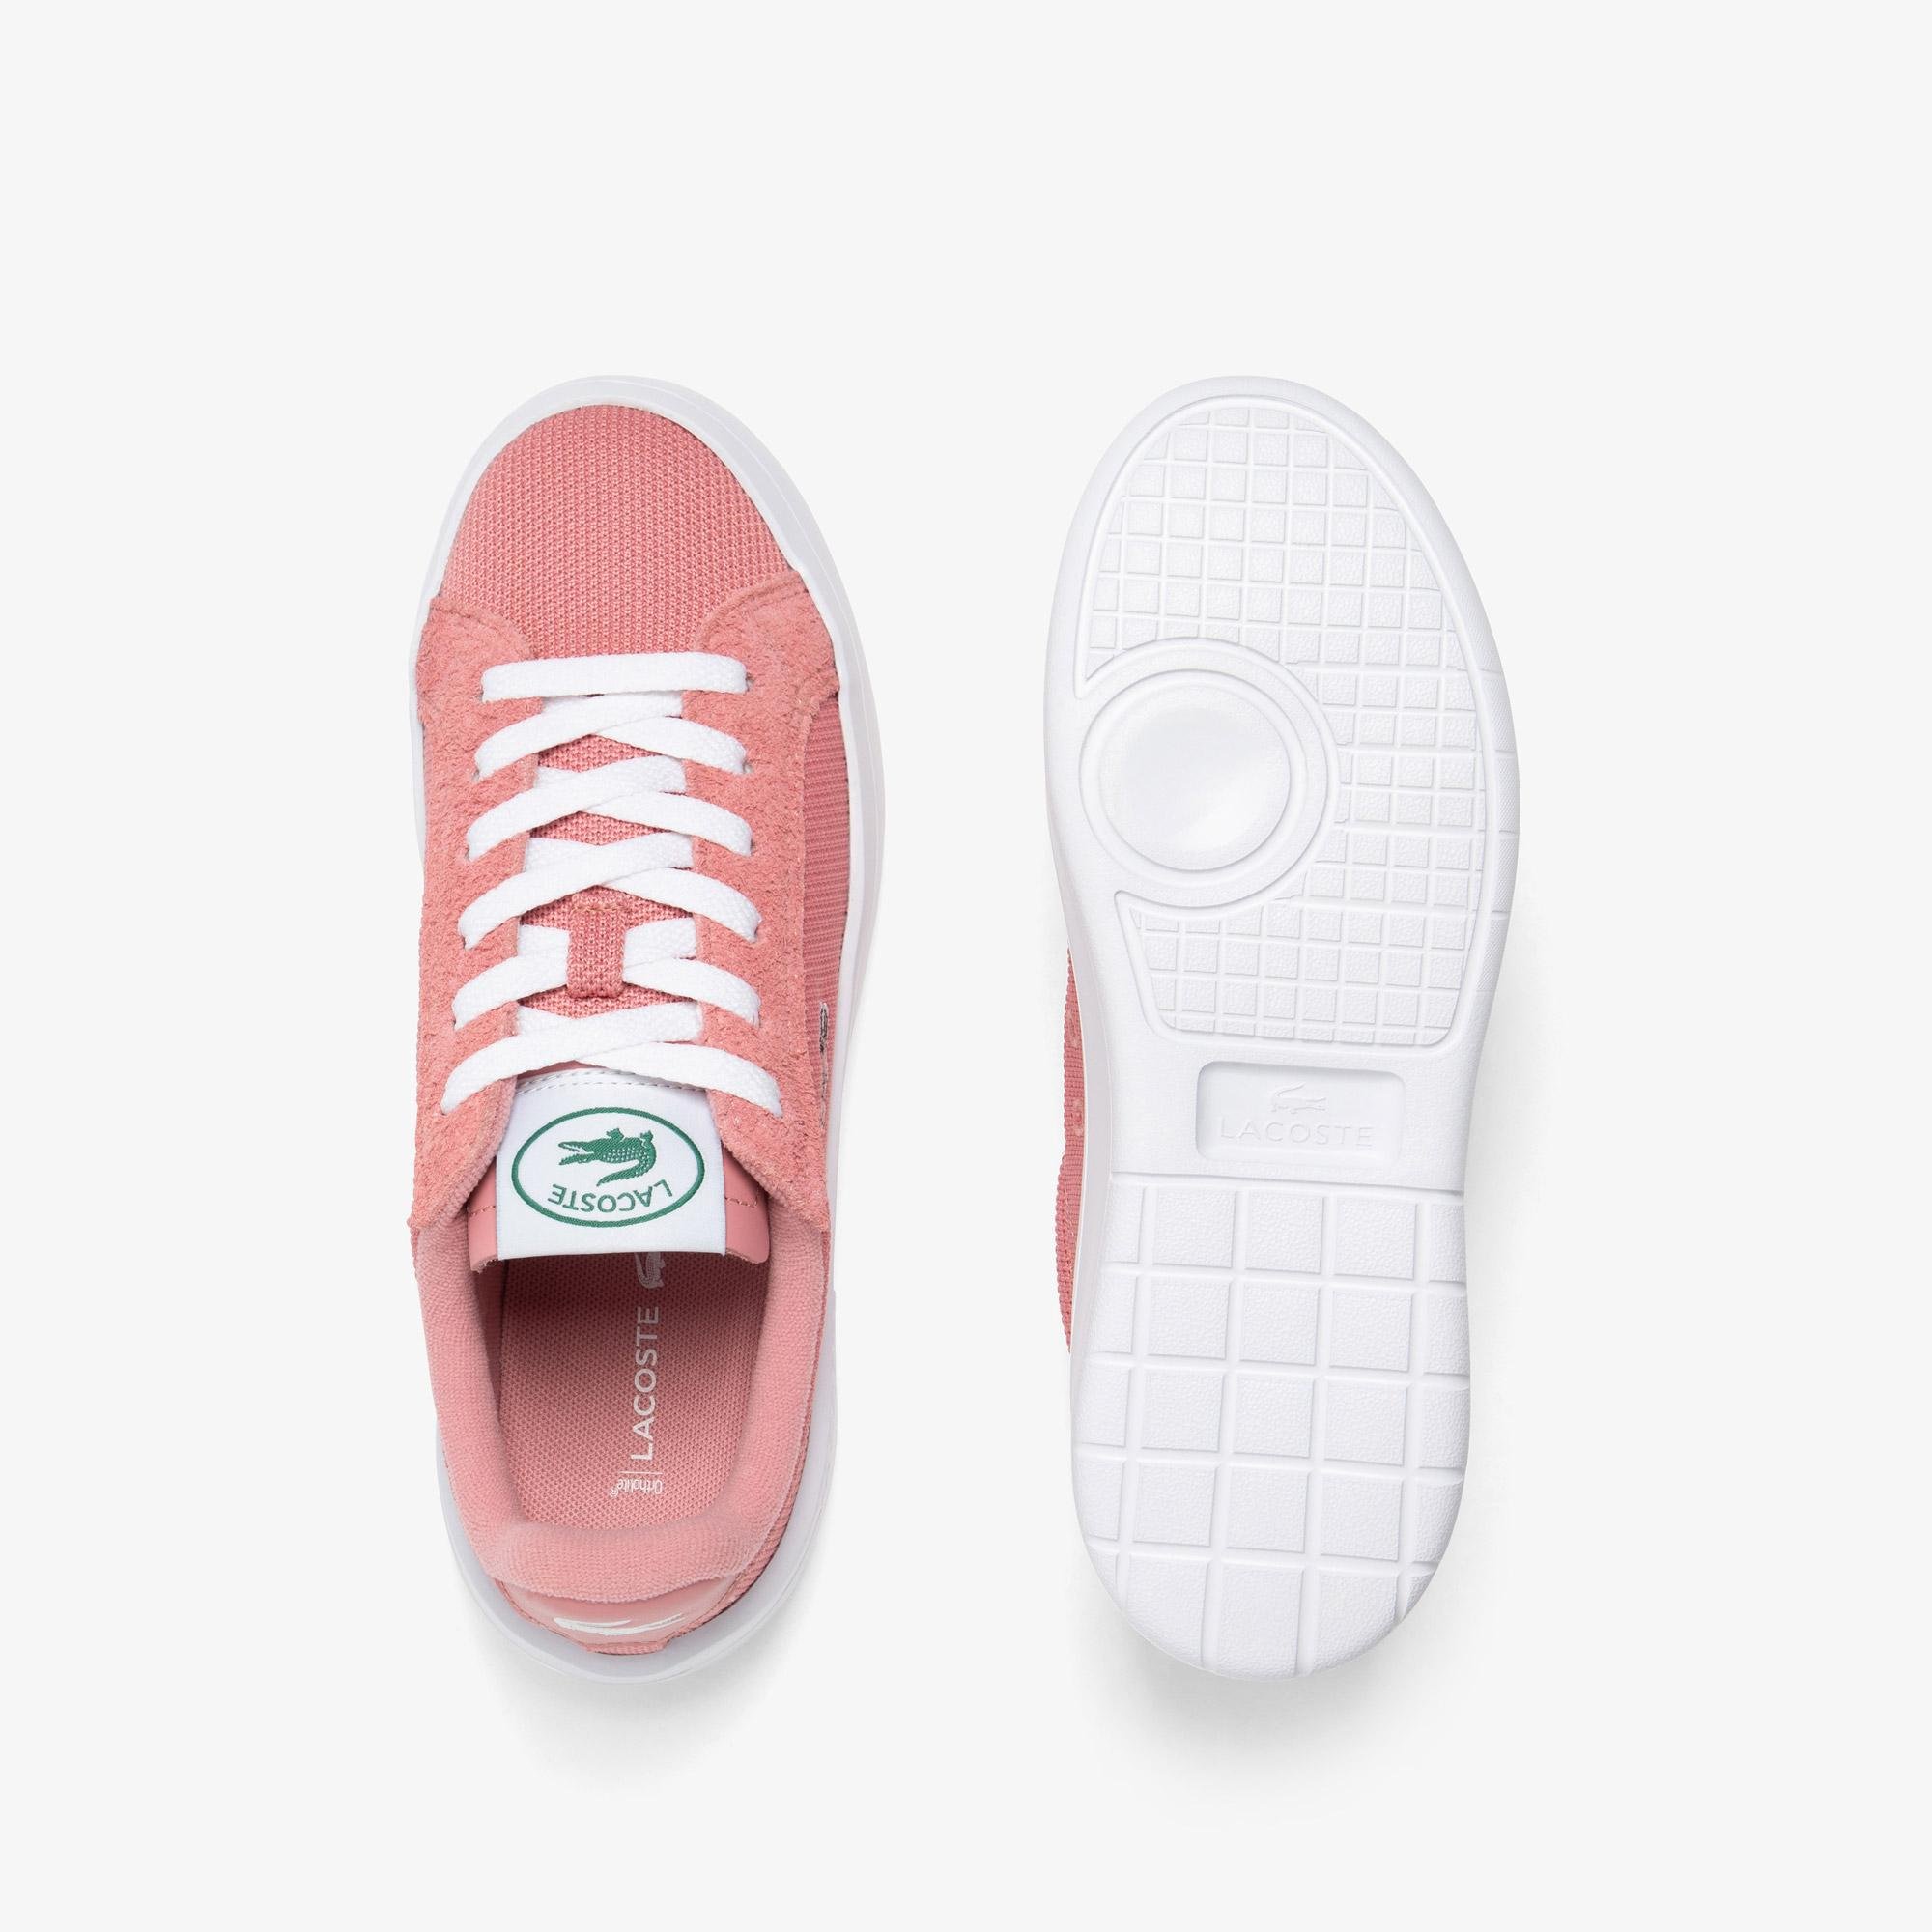 Lacoste Women's Carnaby Platform Shoes